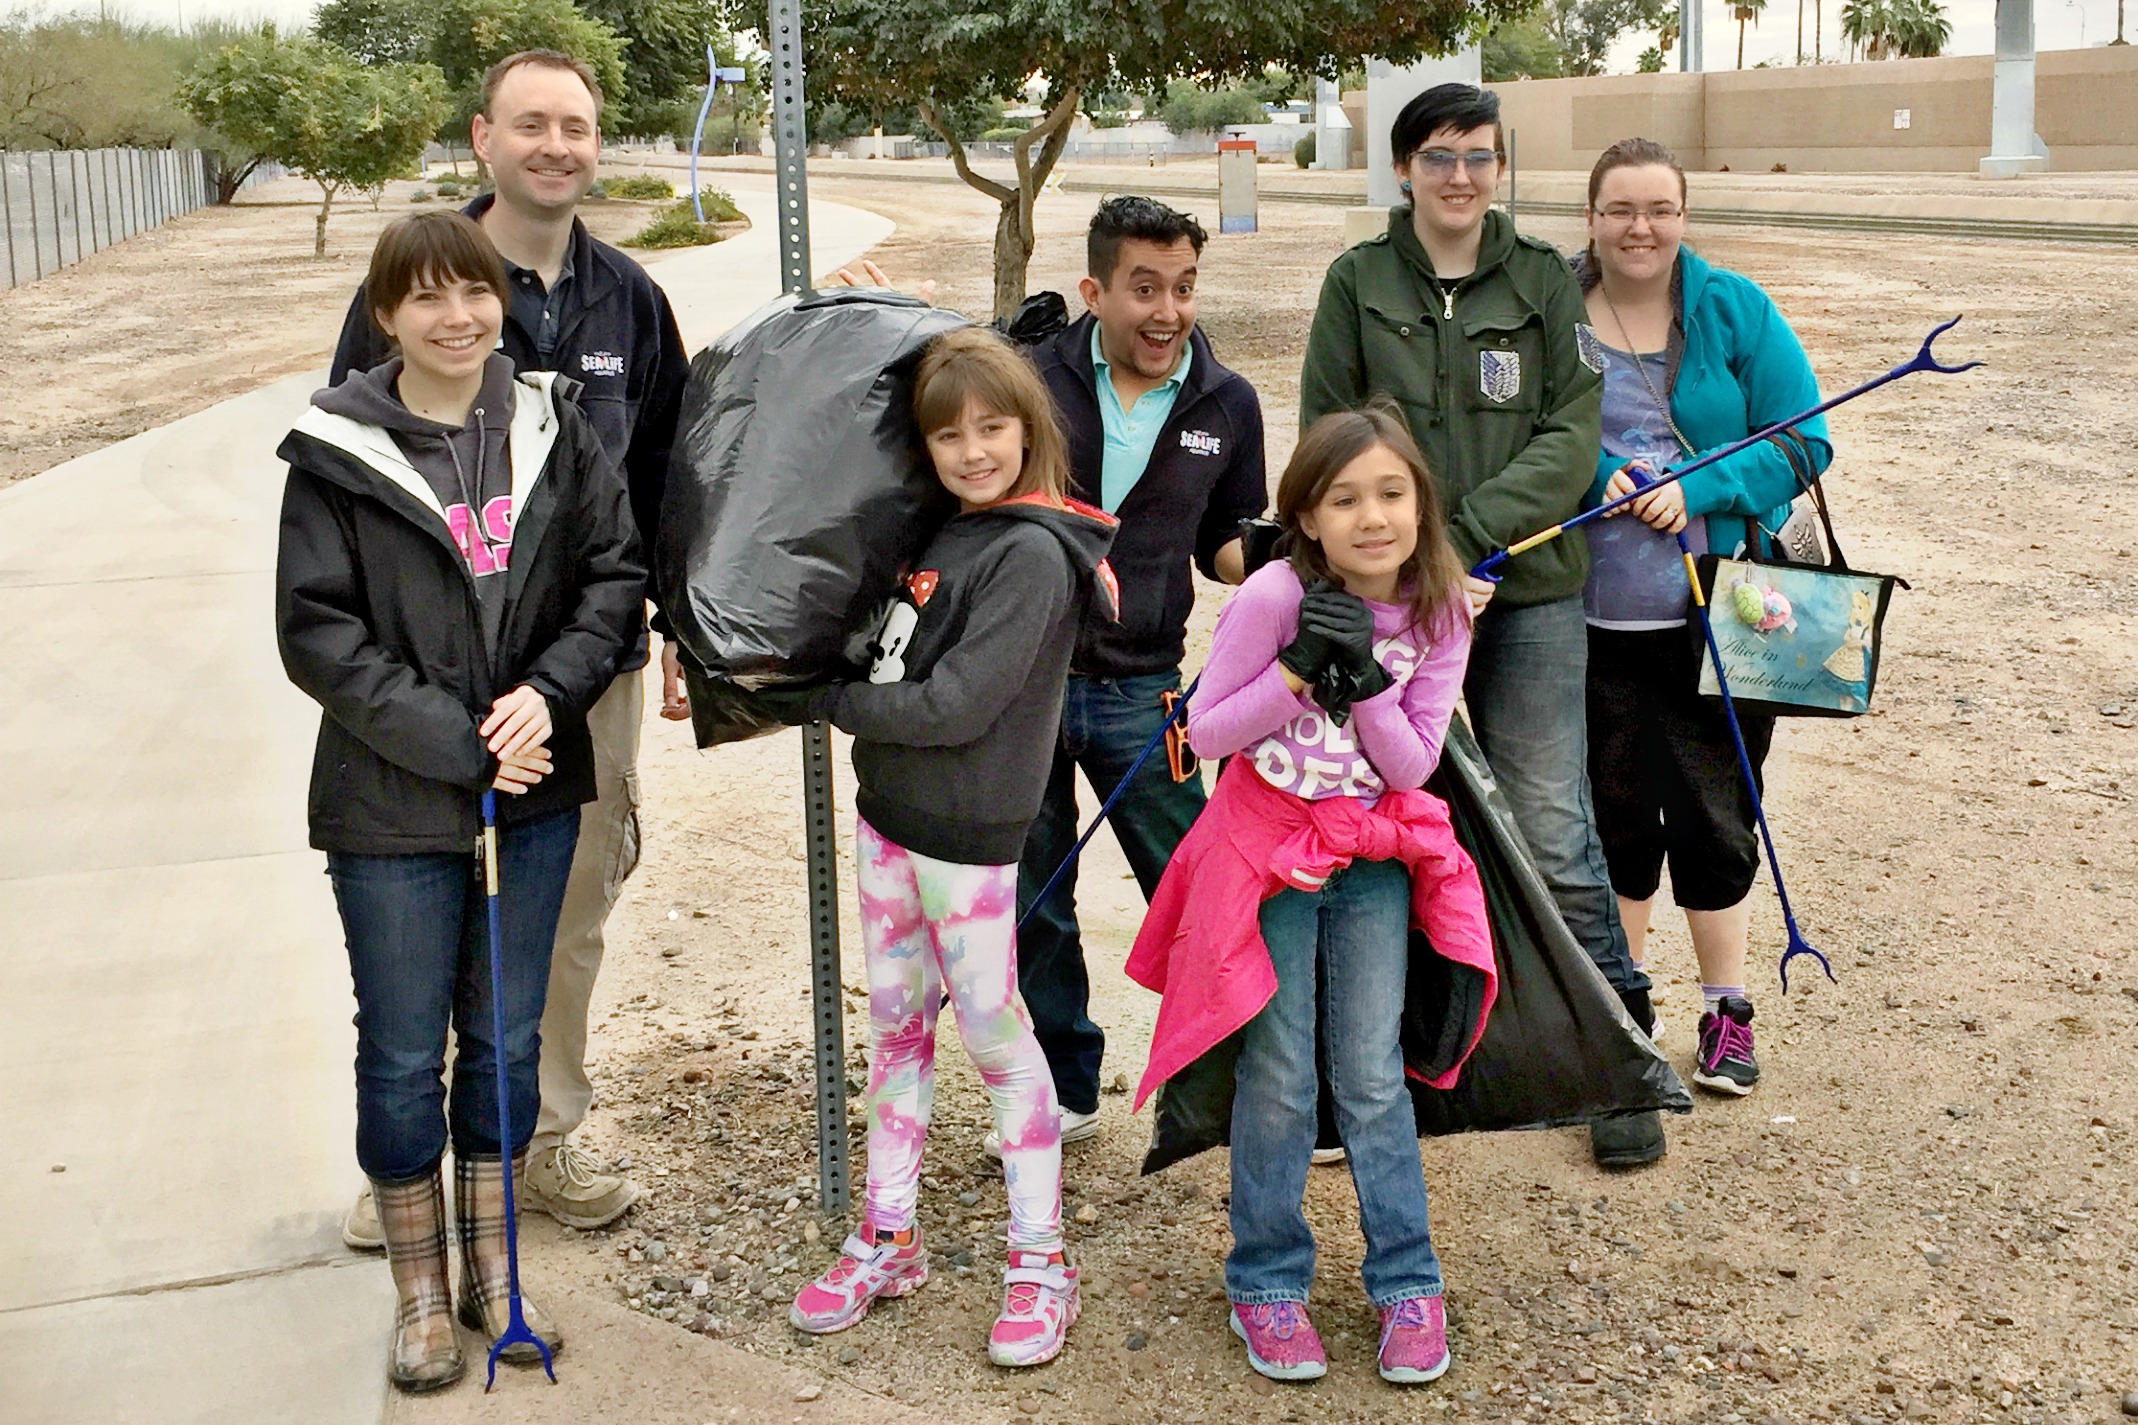 SEA LIFE Arizona Young Environmentalists canal clean up group